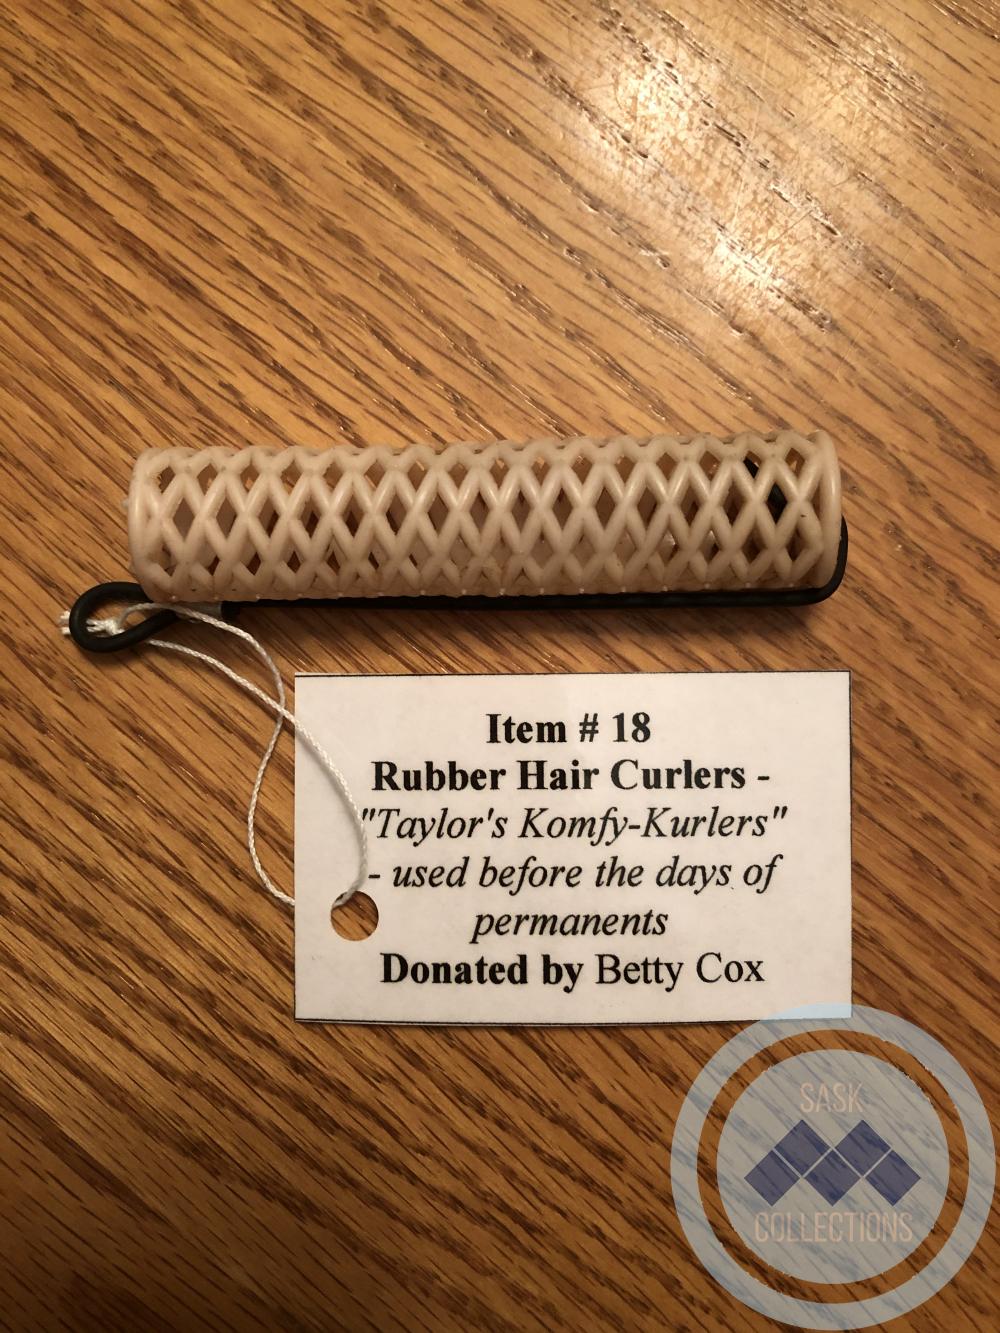 Rubber Hair Curlers - Taylor's Komfy-Kurlers